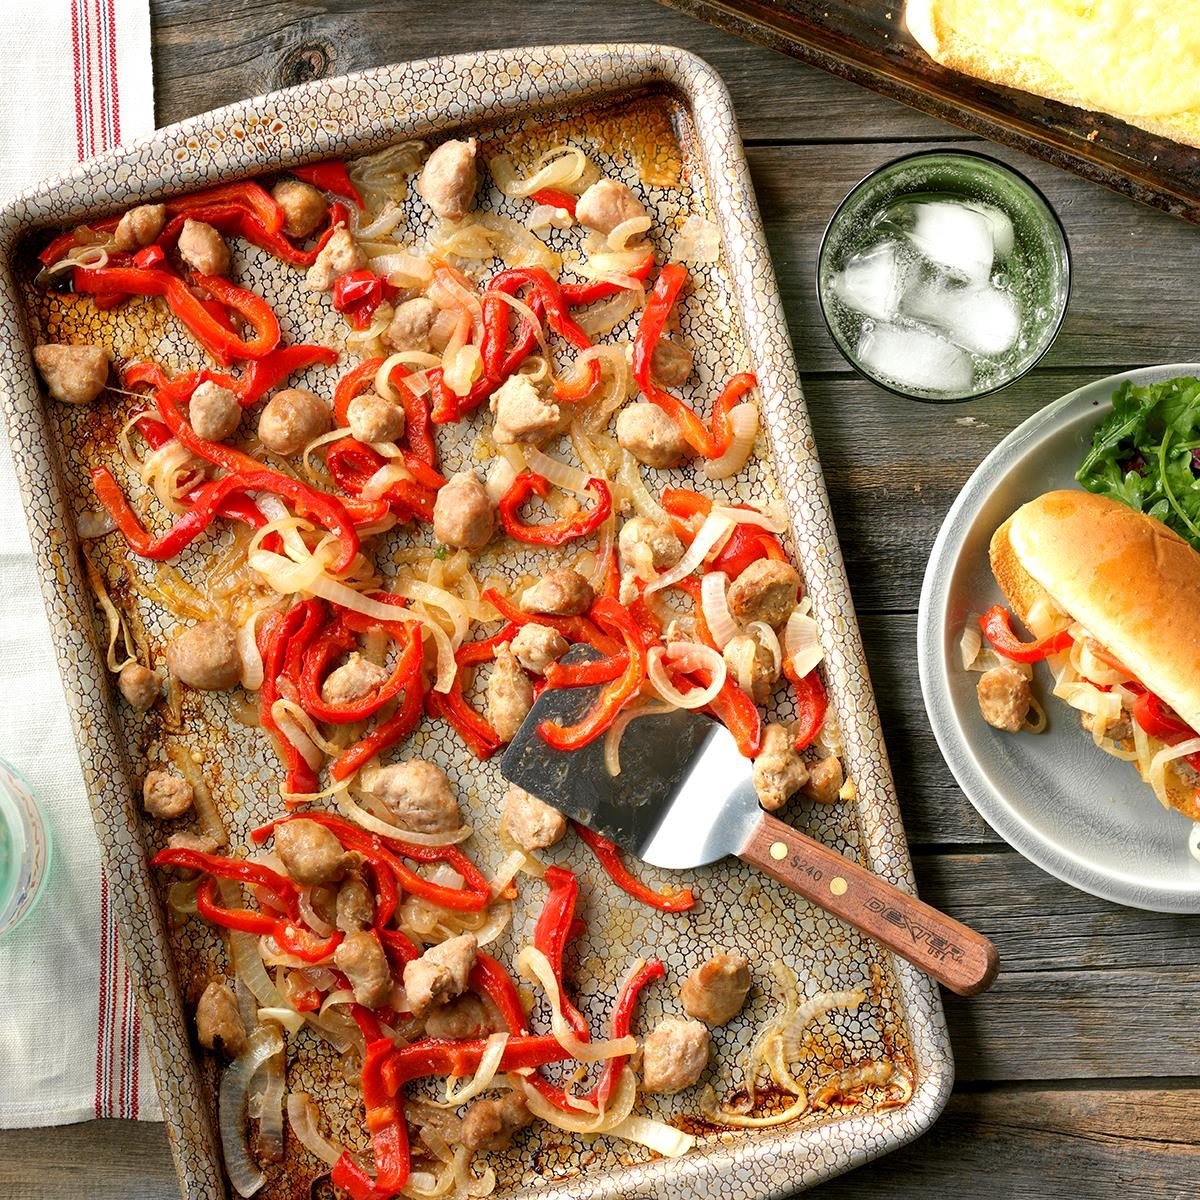 https://www.tasteofhome.com/wp-content/uploads/2018/01/Sausage-and-Pepper-Sheet-Pan-Sandwiches_EXPS_THFM18_207720_D09_14_4b-14.jpg?fit=700%2C1024